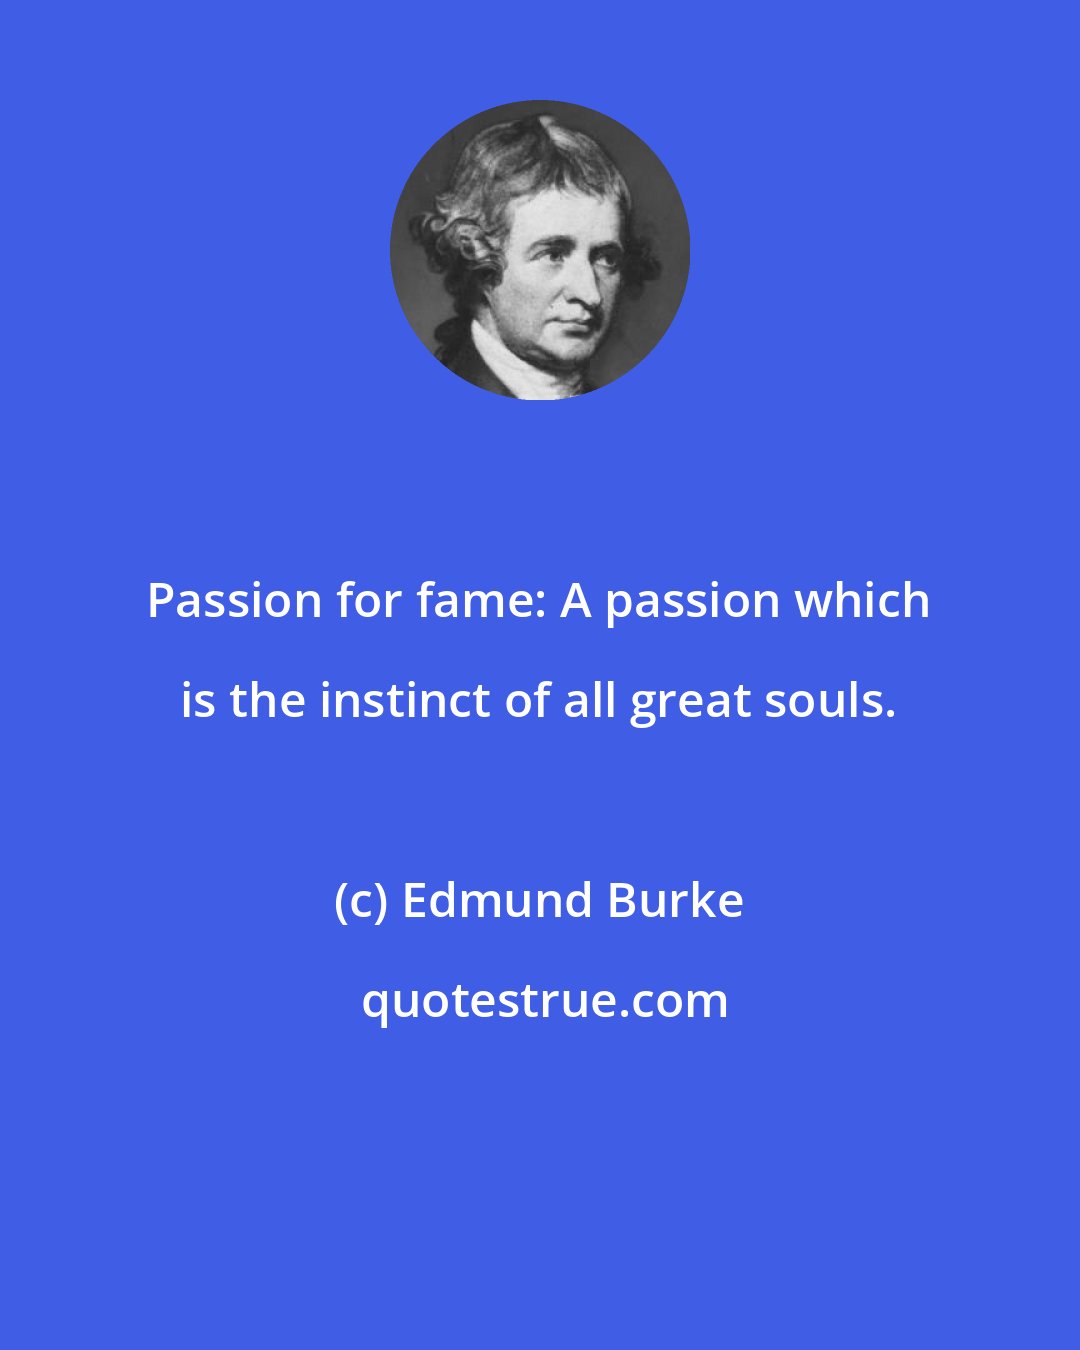 Edmund Burke: Passion for fame: A passion which is the instinct of all great souls.